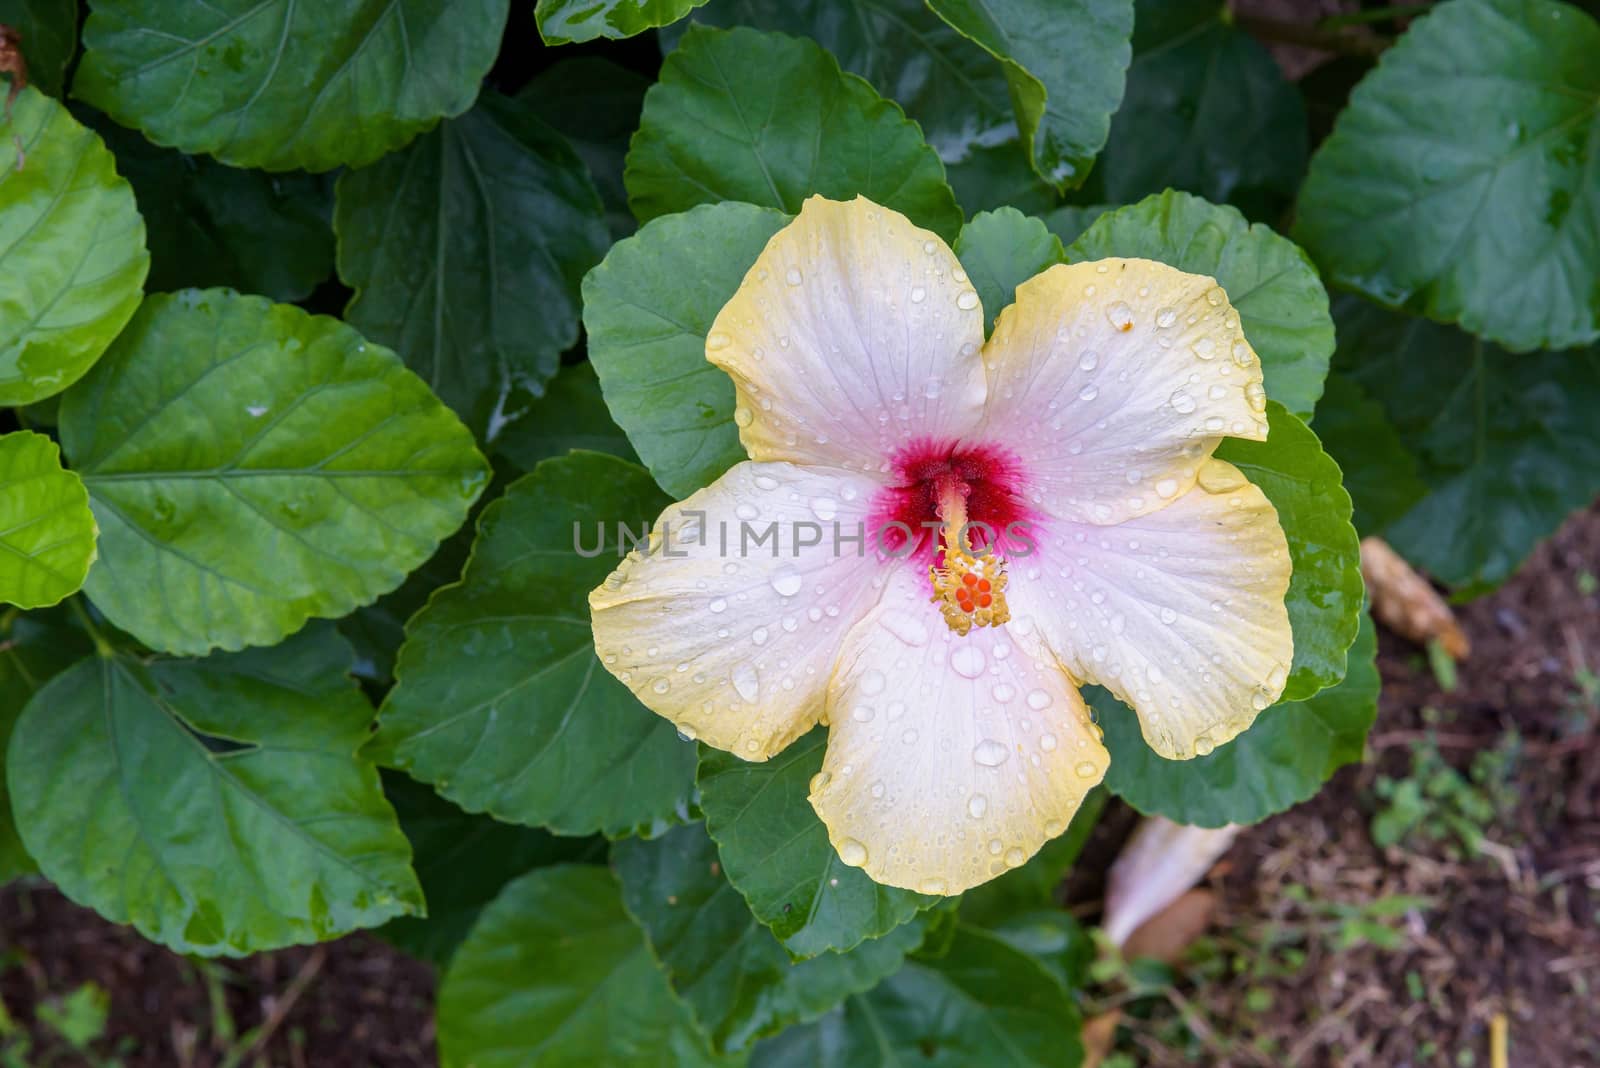 Wet hibiscus flower among green leaves as floral natural background